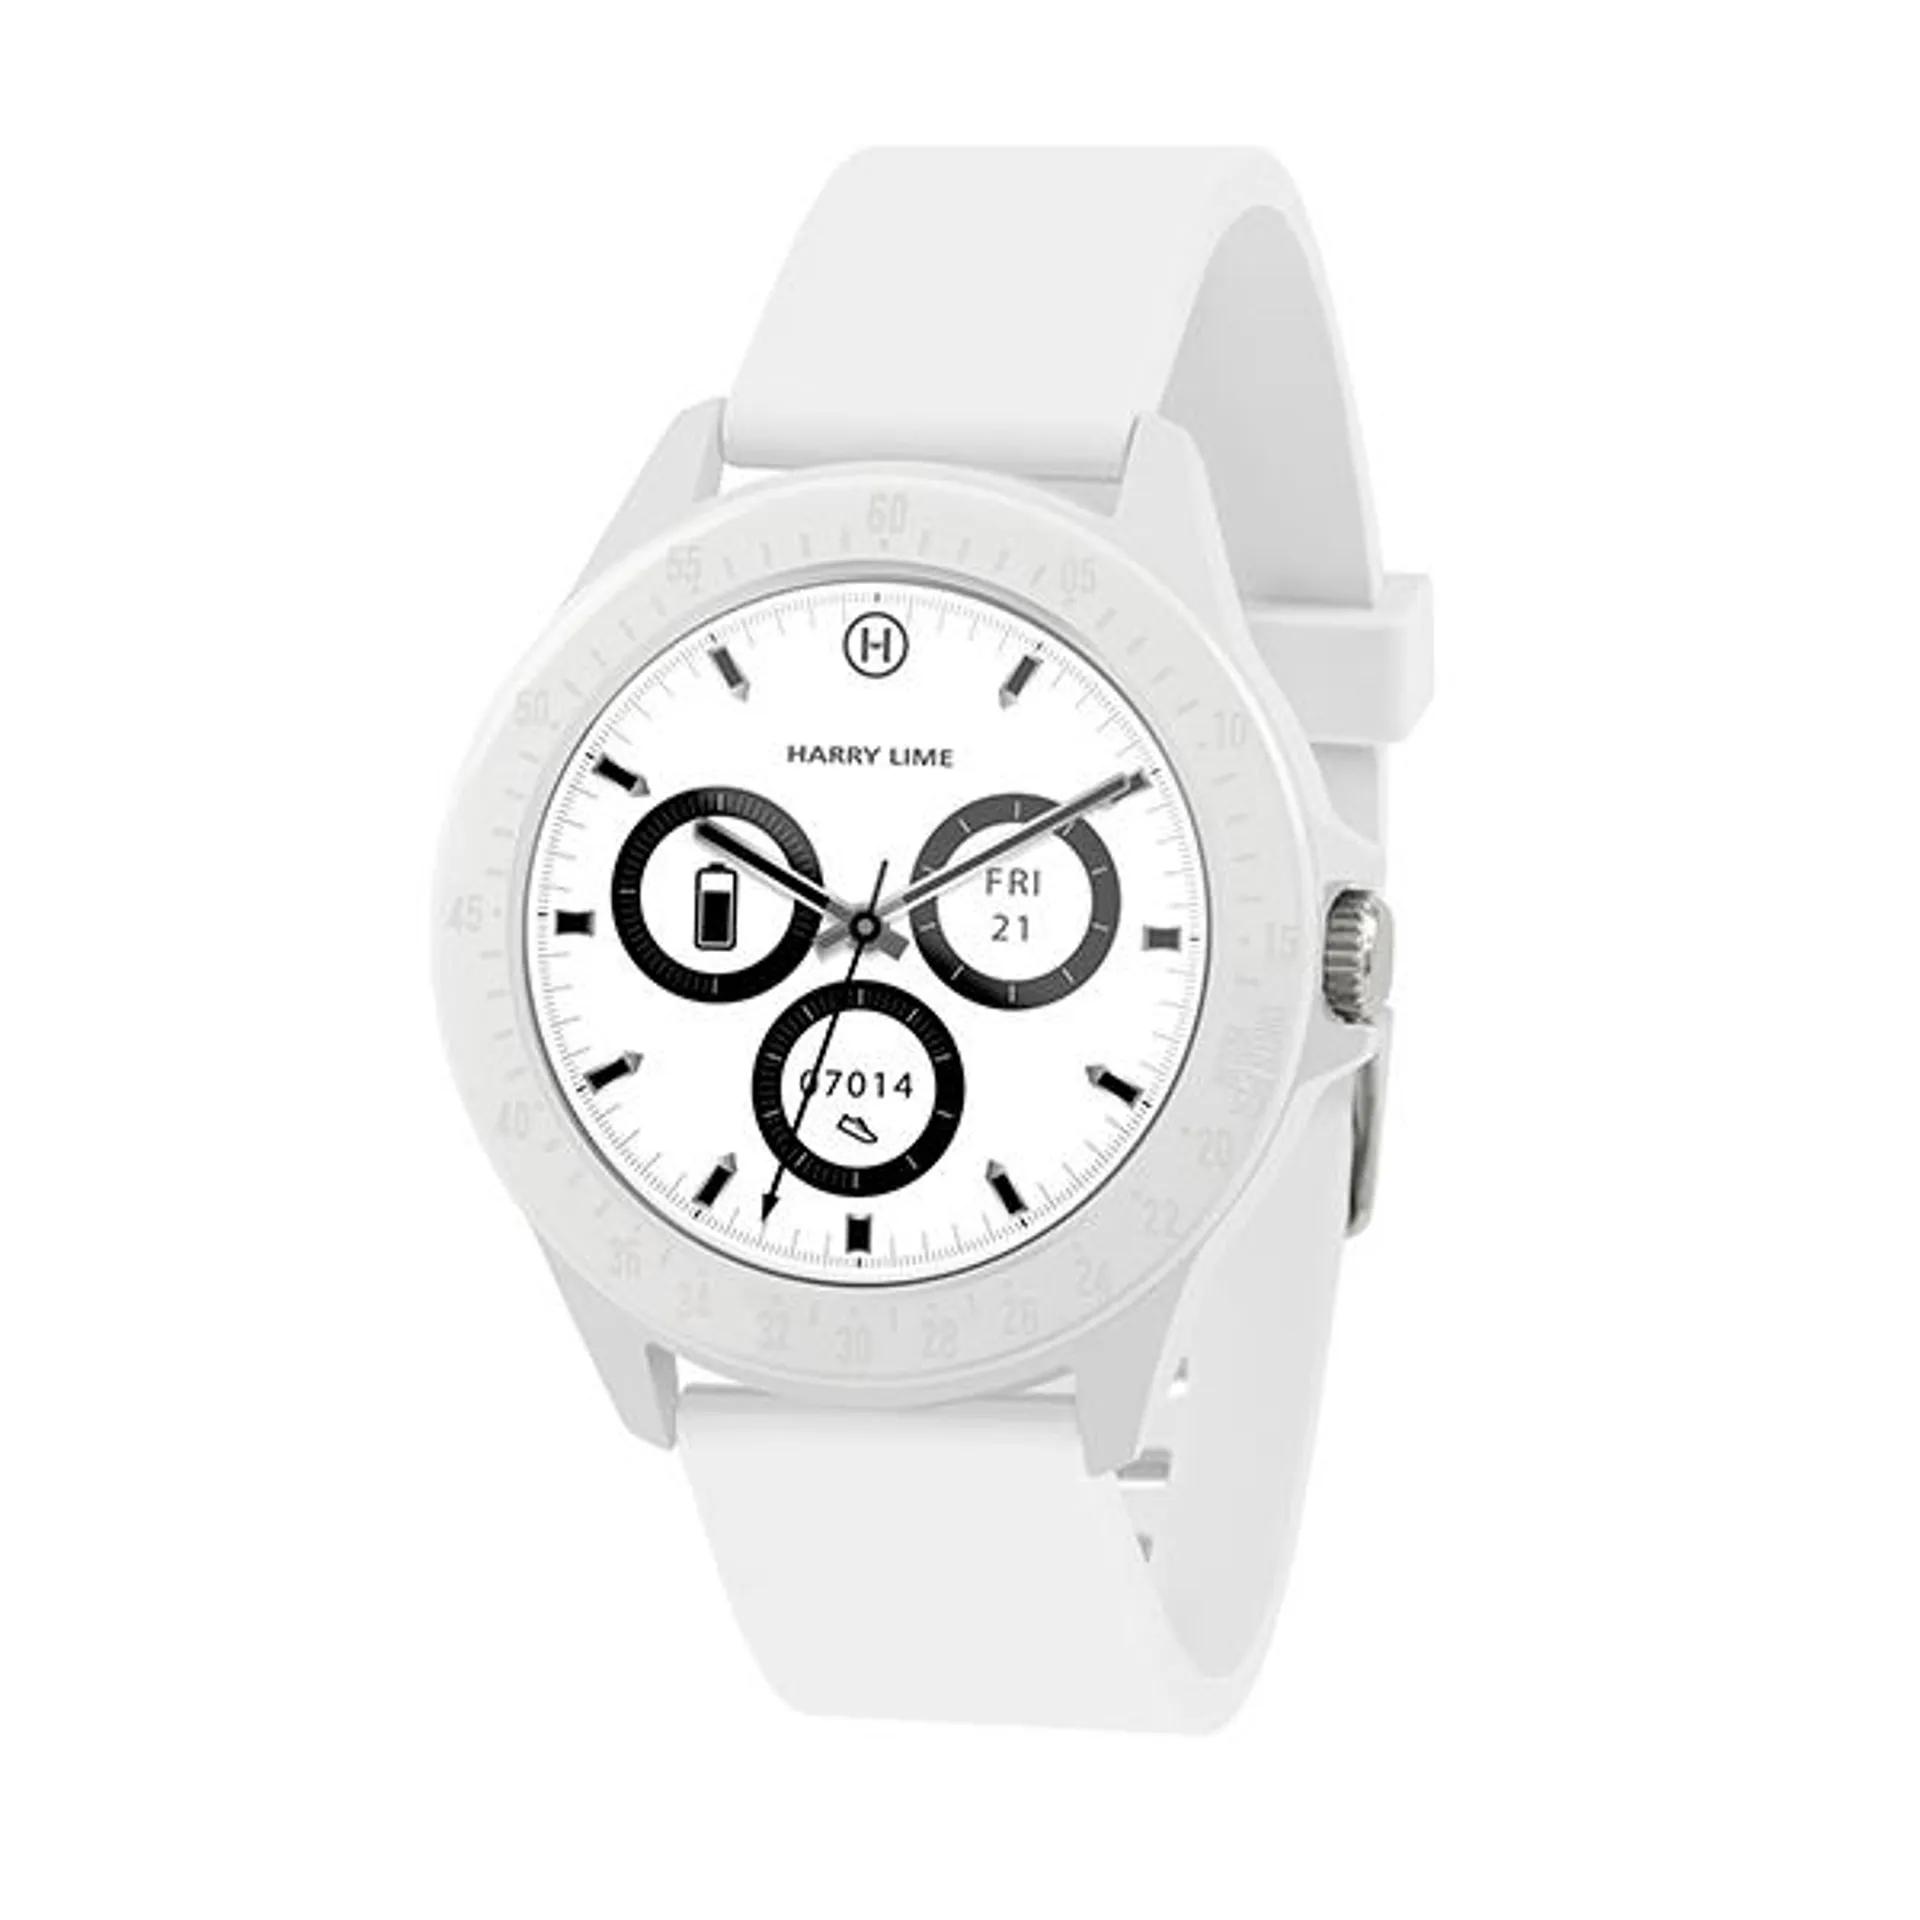 Harry Lime Fashion Smart Watch with White Silicone Strap